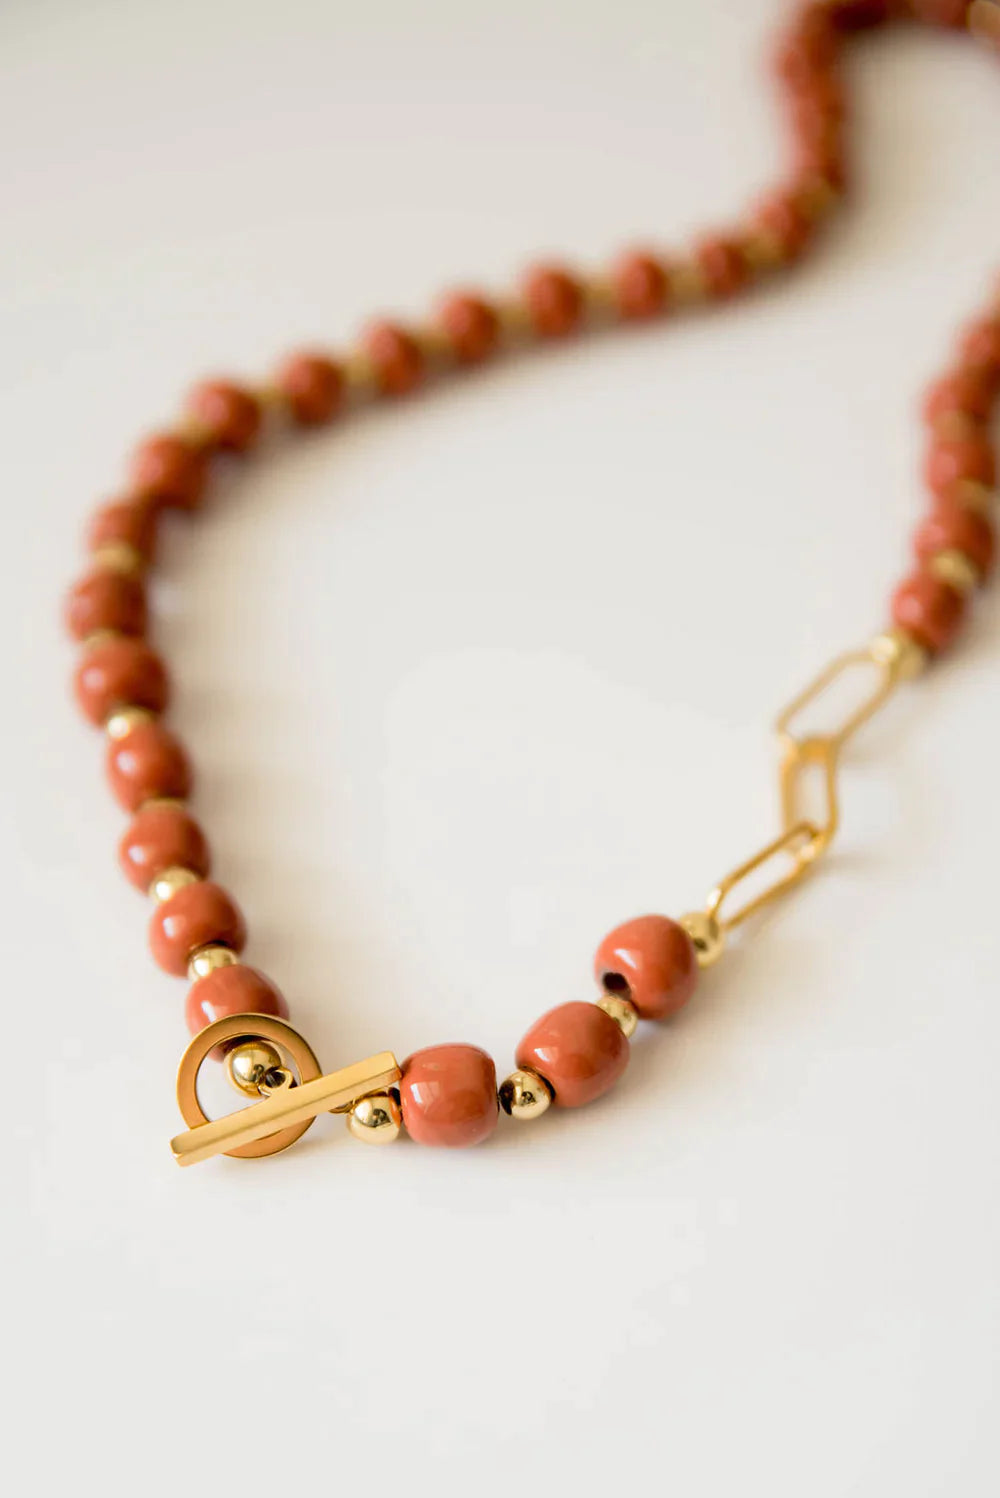 Bel Koz Single Strand Toggle Clay Necklace - TOMATO - Link in description to purchase at Betsey's